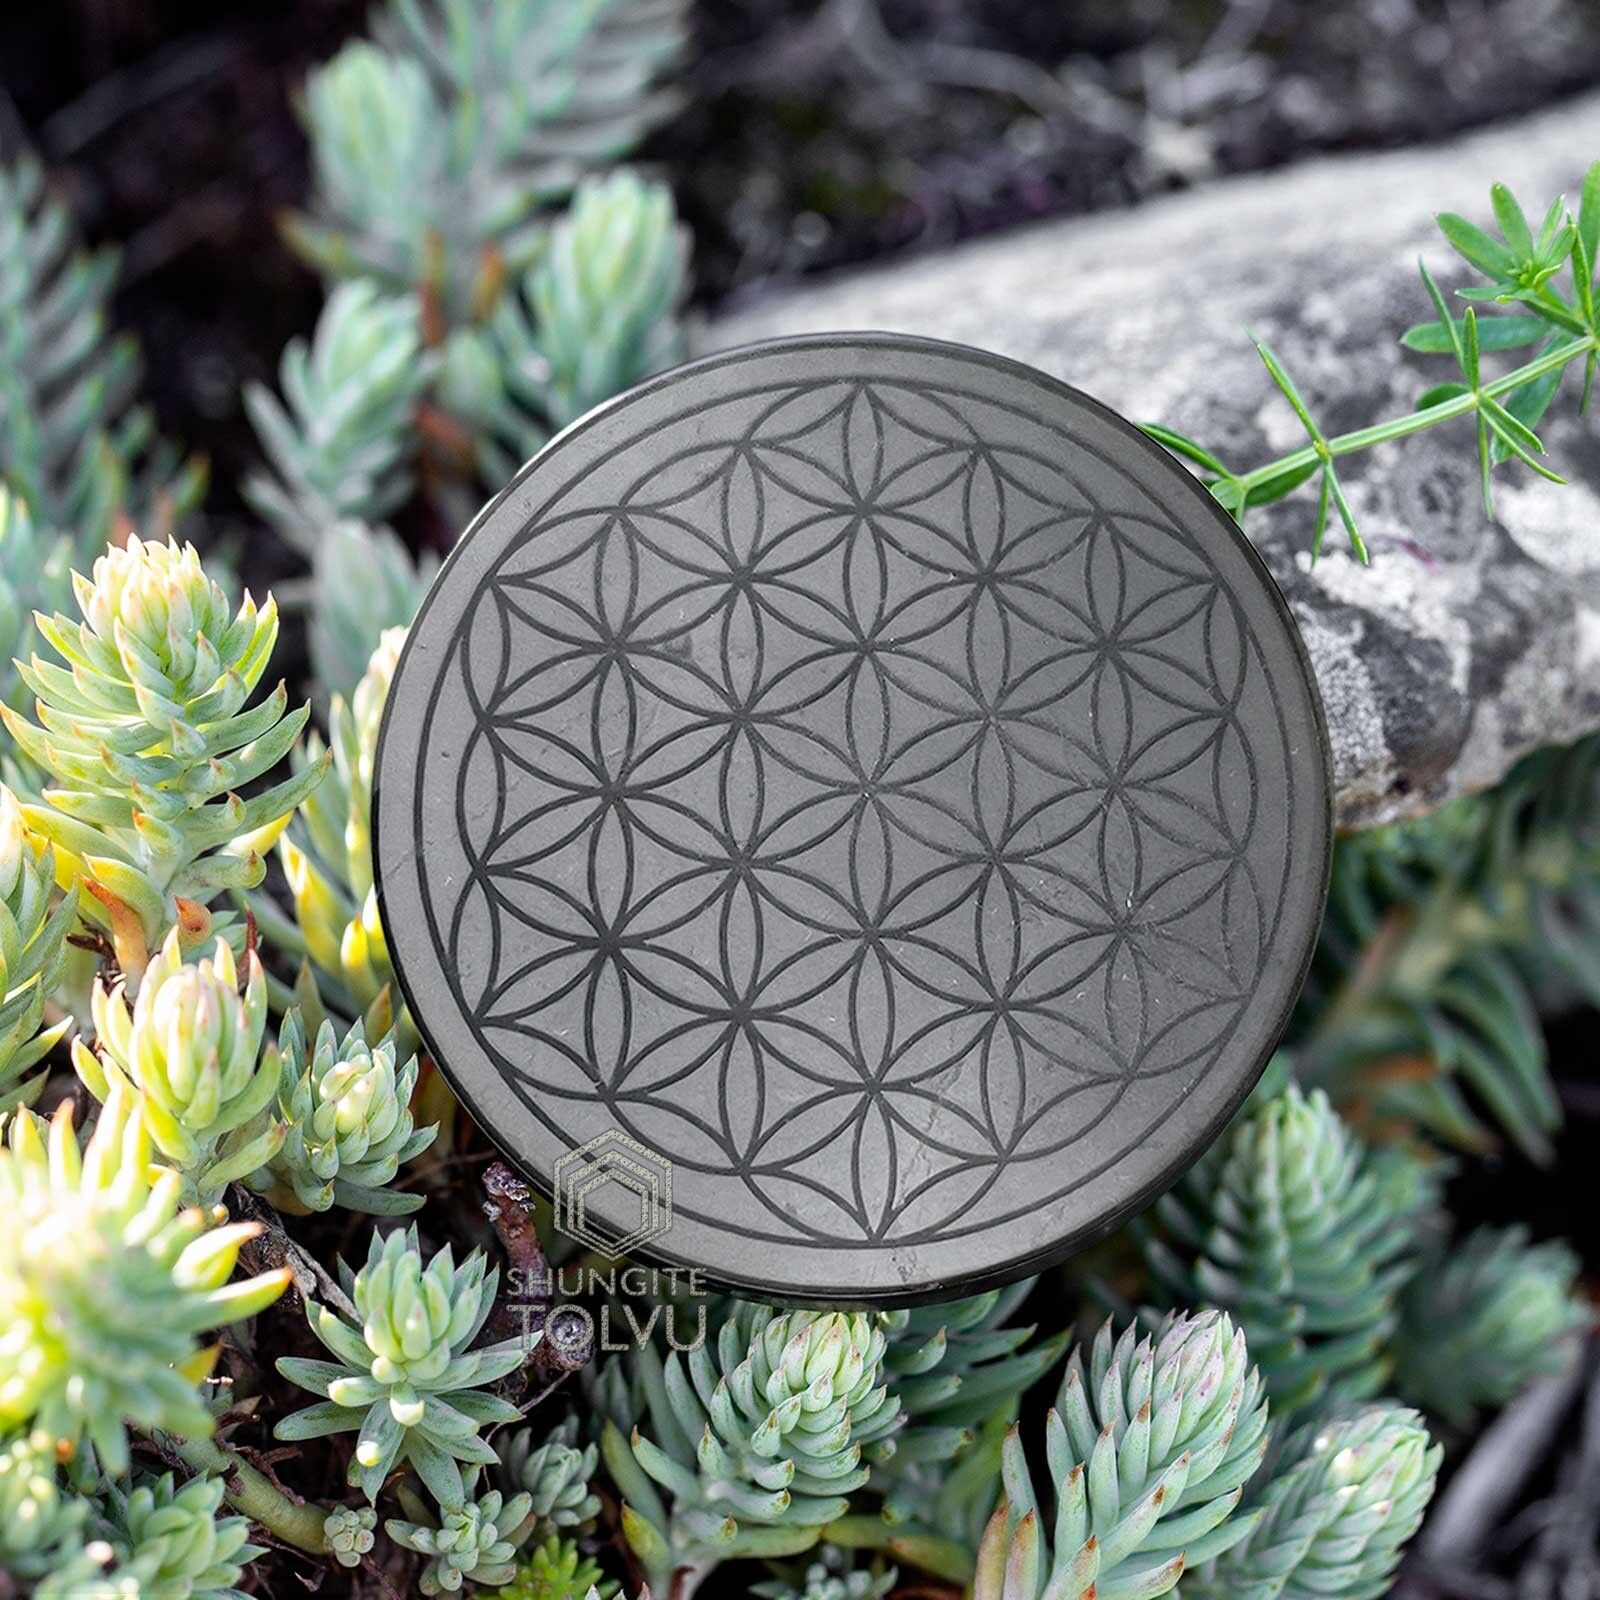 Large Shungite Disk Flower of life Engraved plate EMF Protection stone, Tolvu